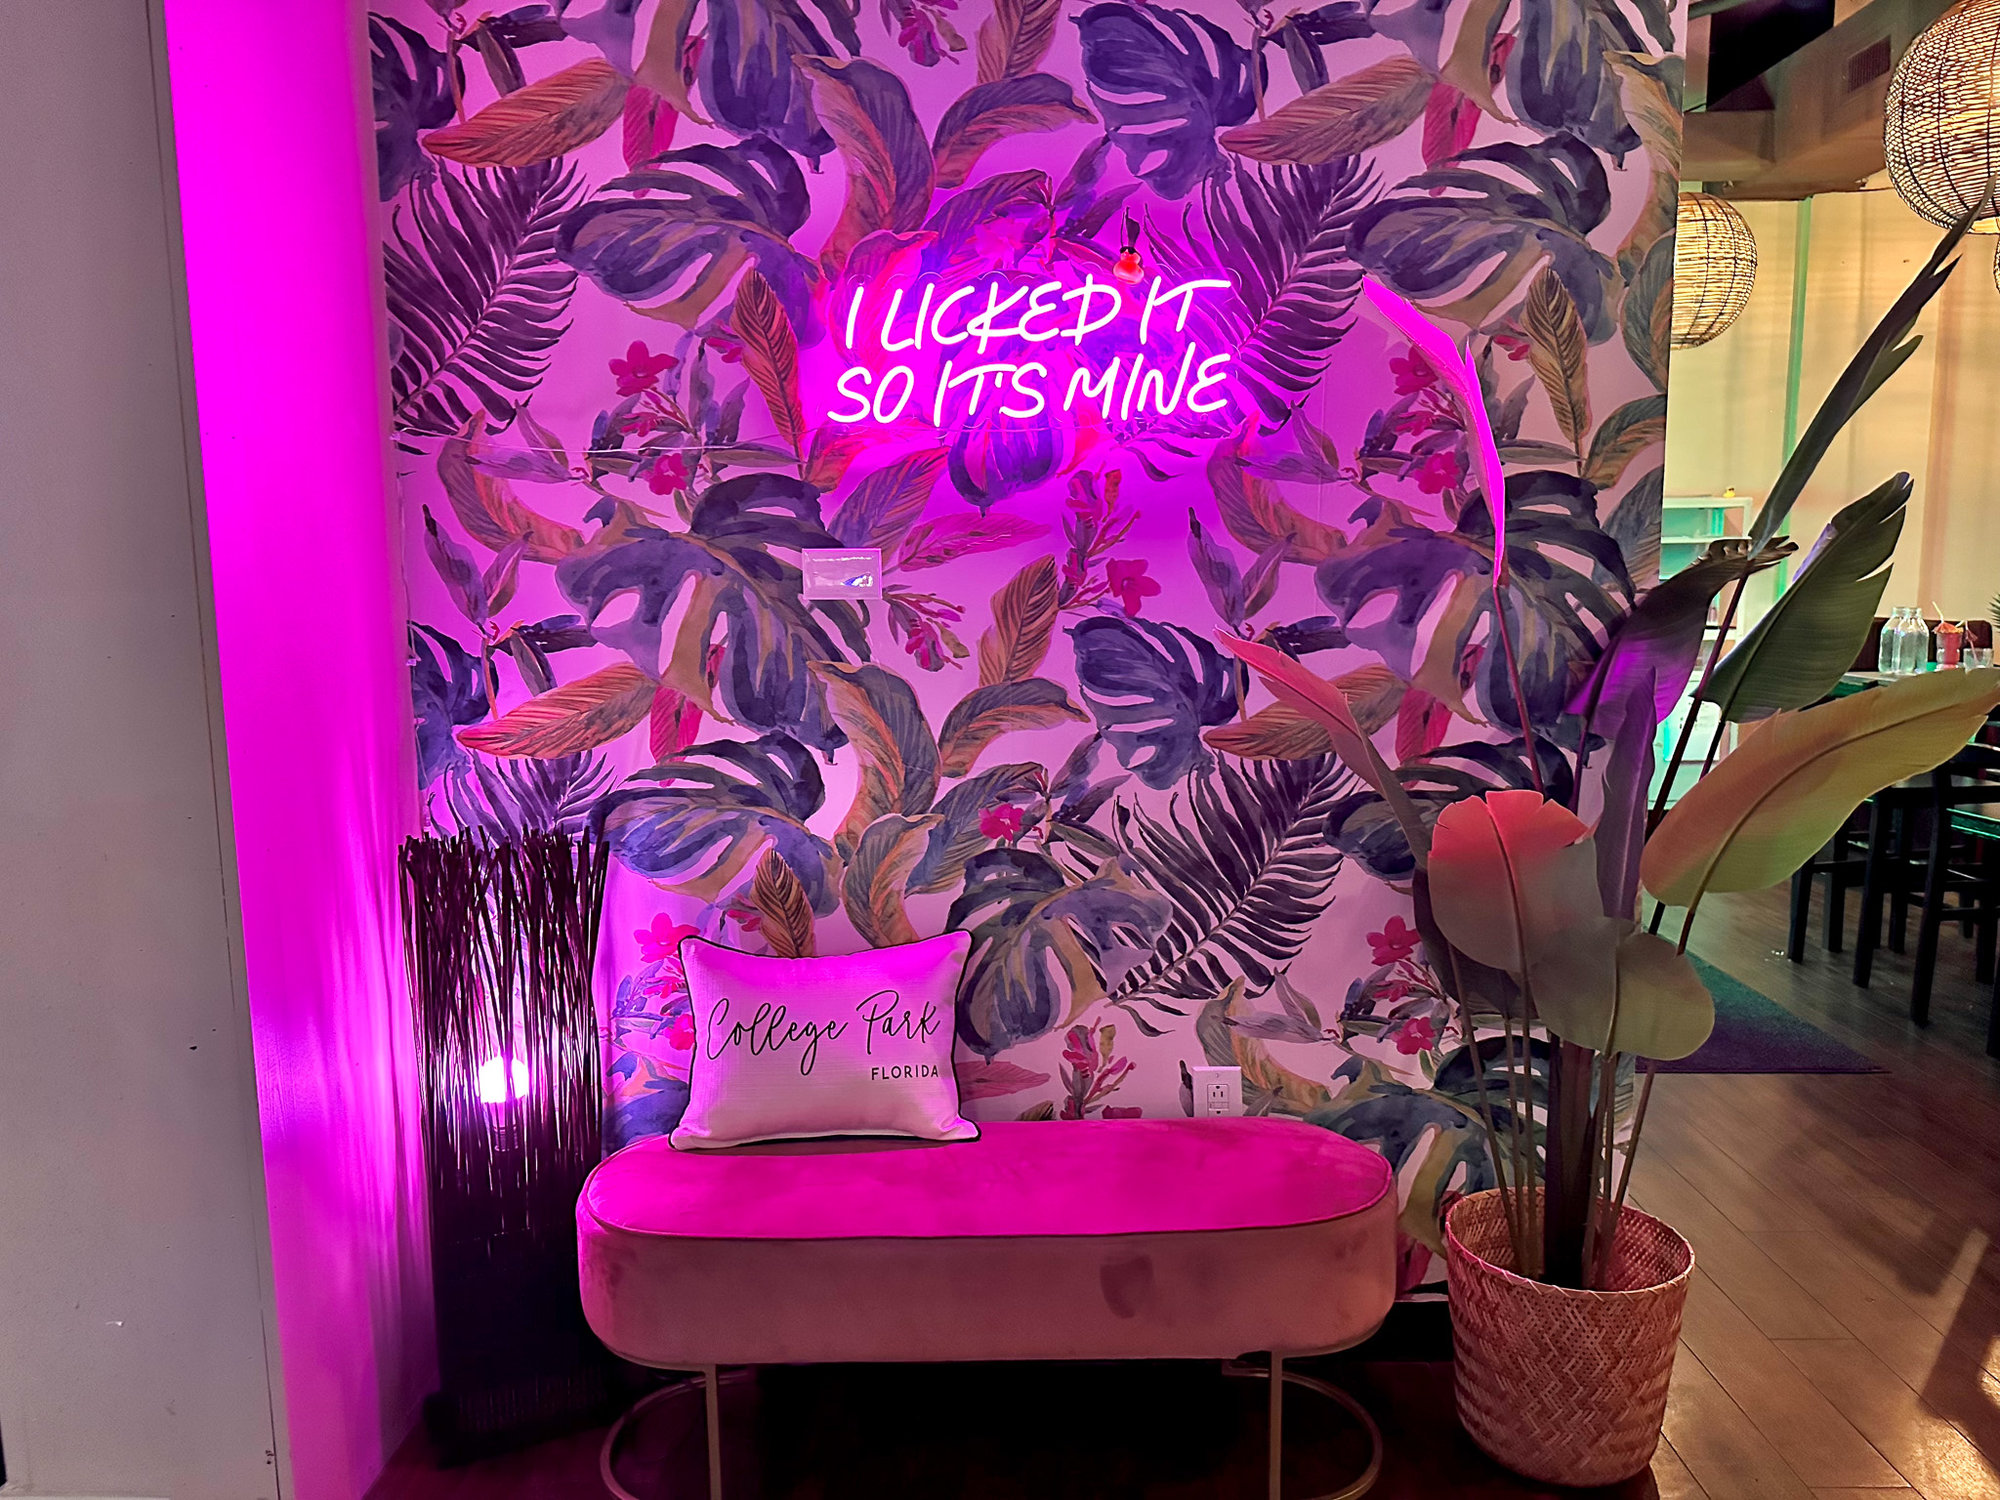 Seat against wall with neon lighting and fern wallpaper